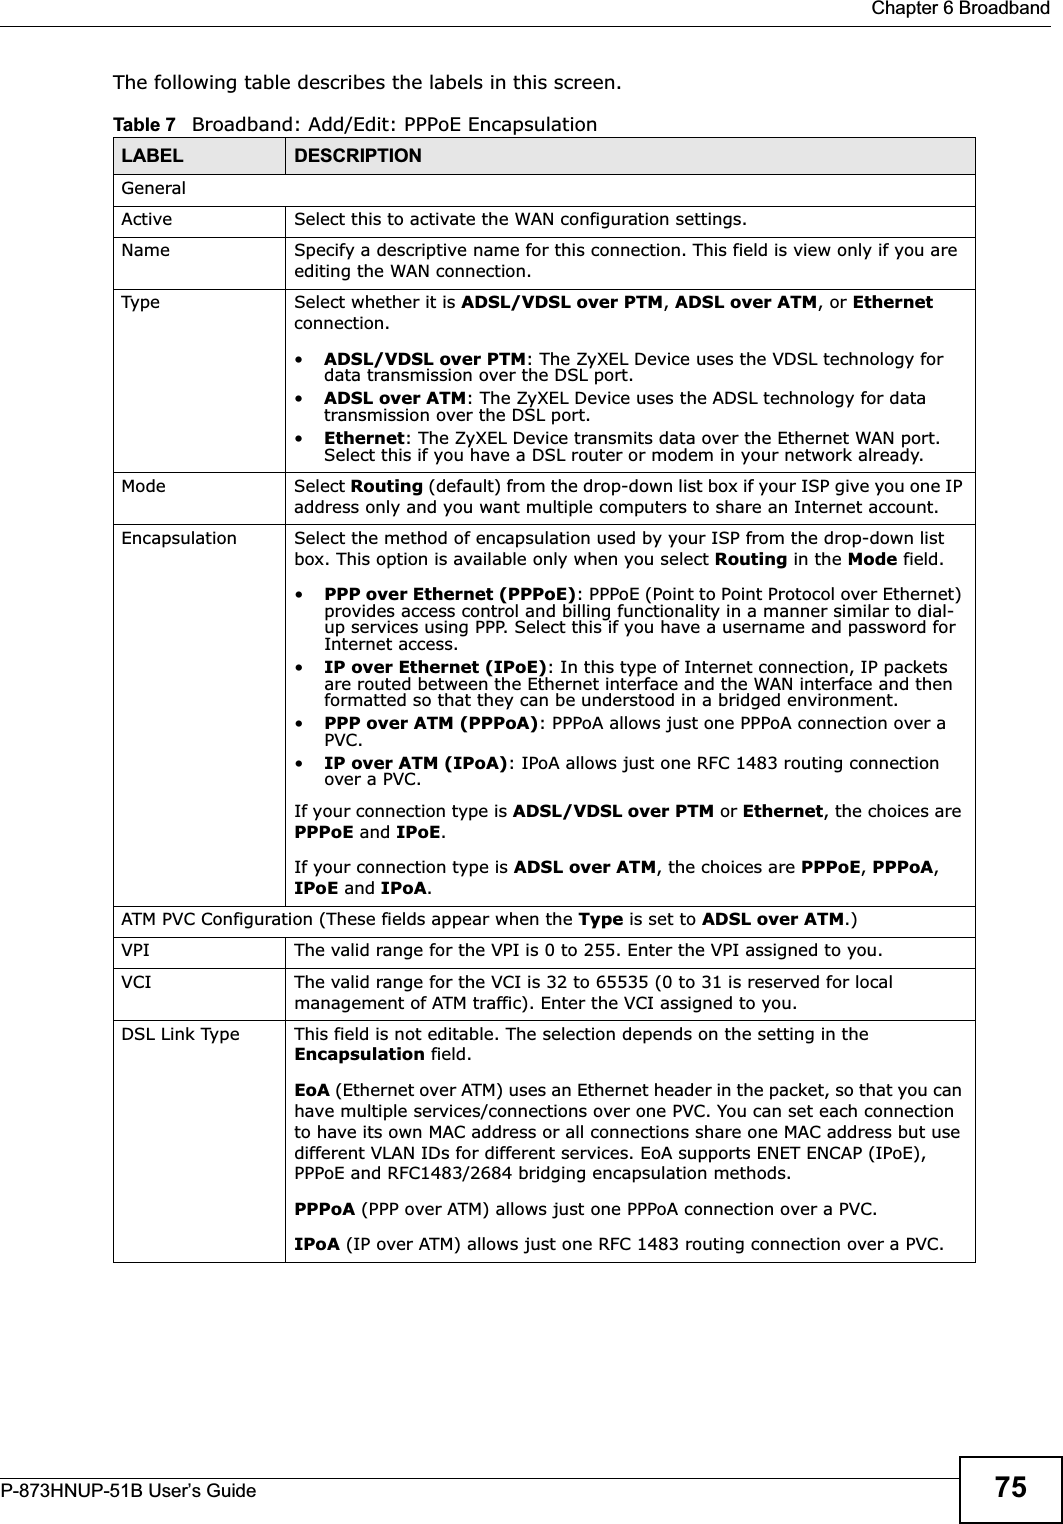  Chapter 6 BroadbandP-873HNUP-51B User’s Guide 75The following table describes the labels in this screen.Table 7   Broadband: Add/Edit: PPPoE EncapsulationLABEL DESCRIPTIONGeneralActive Select this to activate the WAN configuration settings.Name Specify a descriptive name for this connection. This field is view only if you are editing the WAN connection.Type Select whether it is ADSL/VDSL over PTM,ADSL over ATM, or Ethernetconnection.•ADSL/VDSL over PTM: The ZyXEL Device uses the VDSL technology for data transmission over the DSL port.•ADSL over ATM: The ZyXEL Device uses the ADSL technology for data transmission over the DSL port.•Ethernet: The ZyXEL Device transmits data over the Ethernet WAN port. Select this if you have a DSL router or modem in your network already.Mode Select Routing (default) from the drop-down list box if your ISP give you one IP address only and you want multiple computers to share an Internet account. Encapsulation Select the method of encapsulation used by your ISP from the drop-down list box. This option is available only when you select Routing in the Mode field. •PPP over Ethernet (PPPoE): PPPoE (Point to Point Protocol over Ethernet) provides access control and billing functionality in a manner similar to dial-up services using PPP. Select this if you have a username and password for Internet access.•IP over Ethernet (IPoE): In this type of Internet connection, IP packets are routed between the Ethernet interface and the WAN interface and then formatted so that they can be understood in a bridged environment.•PPP over ATM (PPPoA): PPPoA allows just one PPPoA connection over a PVC.•IP over ATM (IPoA): IPoA allows just one RFC 1483 routing connection over a PVC.If your connection type is ADSL/VDSL over PTM or Ethernet, the choices are PPPoE and IPoE.If your connection type is ADSL over ATM, the choices are PPPoE, PPPoA,IPoE and IPoA.ATM PVC Configuration (These fields appear when the Type is set to ADSL over ATM.)VPI  The valid range for the VPI is 0 to 255. Enter the VPI assigned to you.VCI  The valid range for the VCI is 32 to 65535 (0 to 31 is reserved for local management of ATM traffic). Enter the VCI assigned to you.DSL Link Type This field is not editable. The selection depends on the setting in the Encapsulation field.EoA (Ethernet over ATM) uses an Ethernet header in the packet, so that you can have multiple services/connections over one PVC. You can set each connection to have its own MAC address or all connections share one MAC address but use different VLAN IDs for different services. EoA supports ENET ENCAP (IPoE), PPPoE and RFC1483/2684 bridging encapsulation methods. PPPoA (PPP over ATM) allows just one PPPoA connection over a PVC.IPoA (IP over ATM) allows just one RFC 1483 routing connection over a PVC.